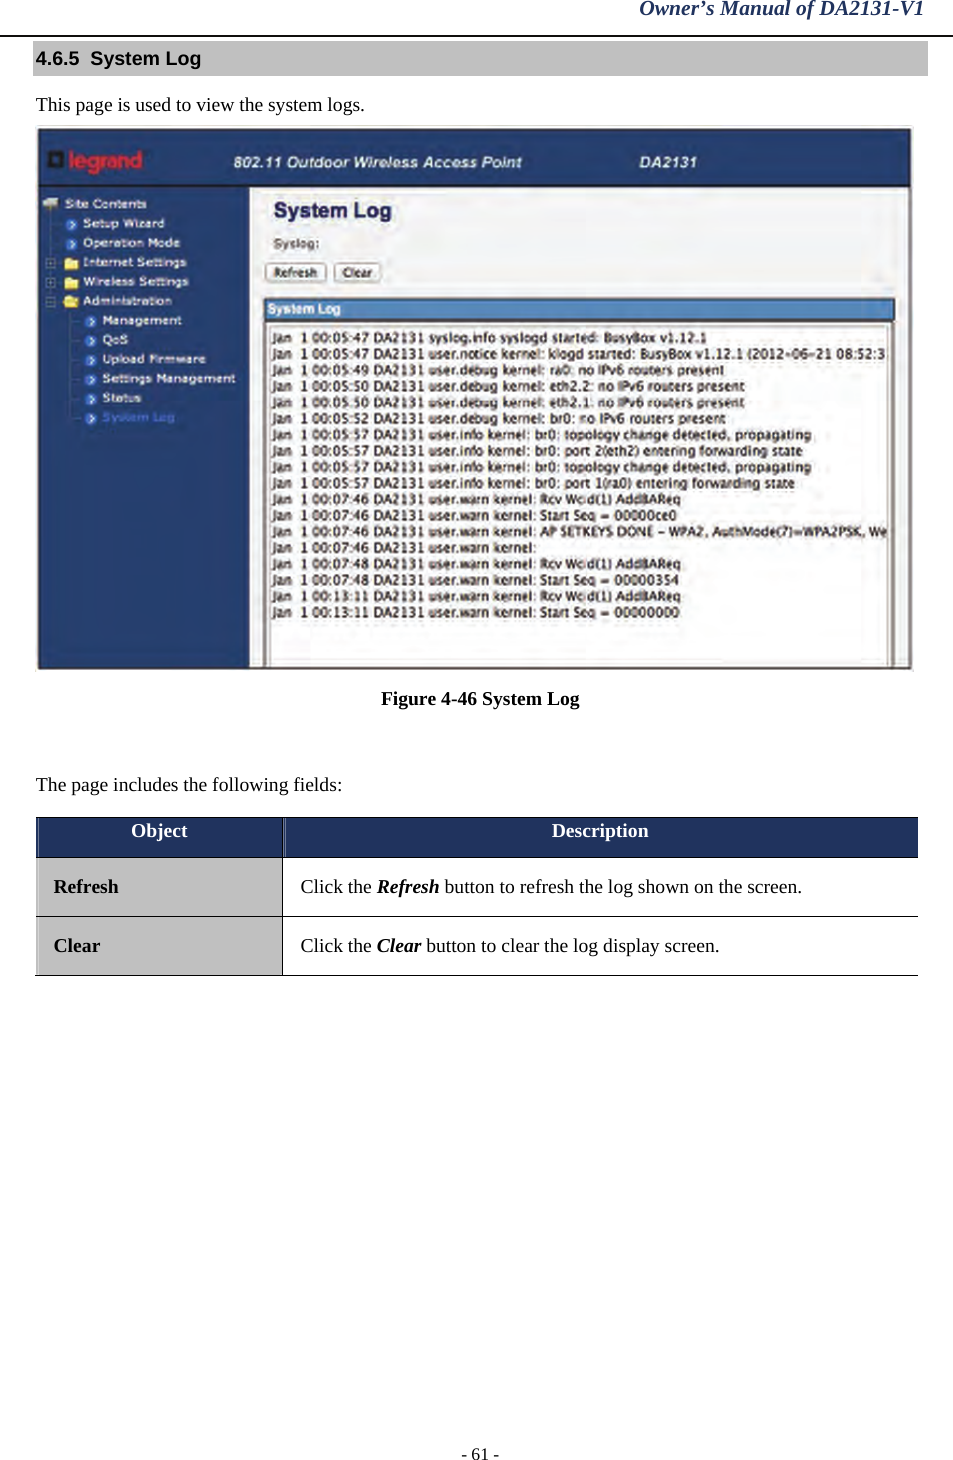 Owner’s Manual of DA2131-V1 - 61 - 4.6.5  System Log  This page is used to view the system logs.  Figure 4-46 System Log  The page includes the following fields: Object  Description Refresh   Click the Refresh button to refresh the log shown on the screen.  Clear   Click the Clear button to clear the log display screen.     